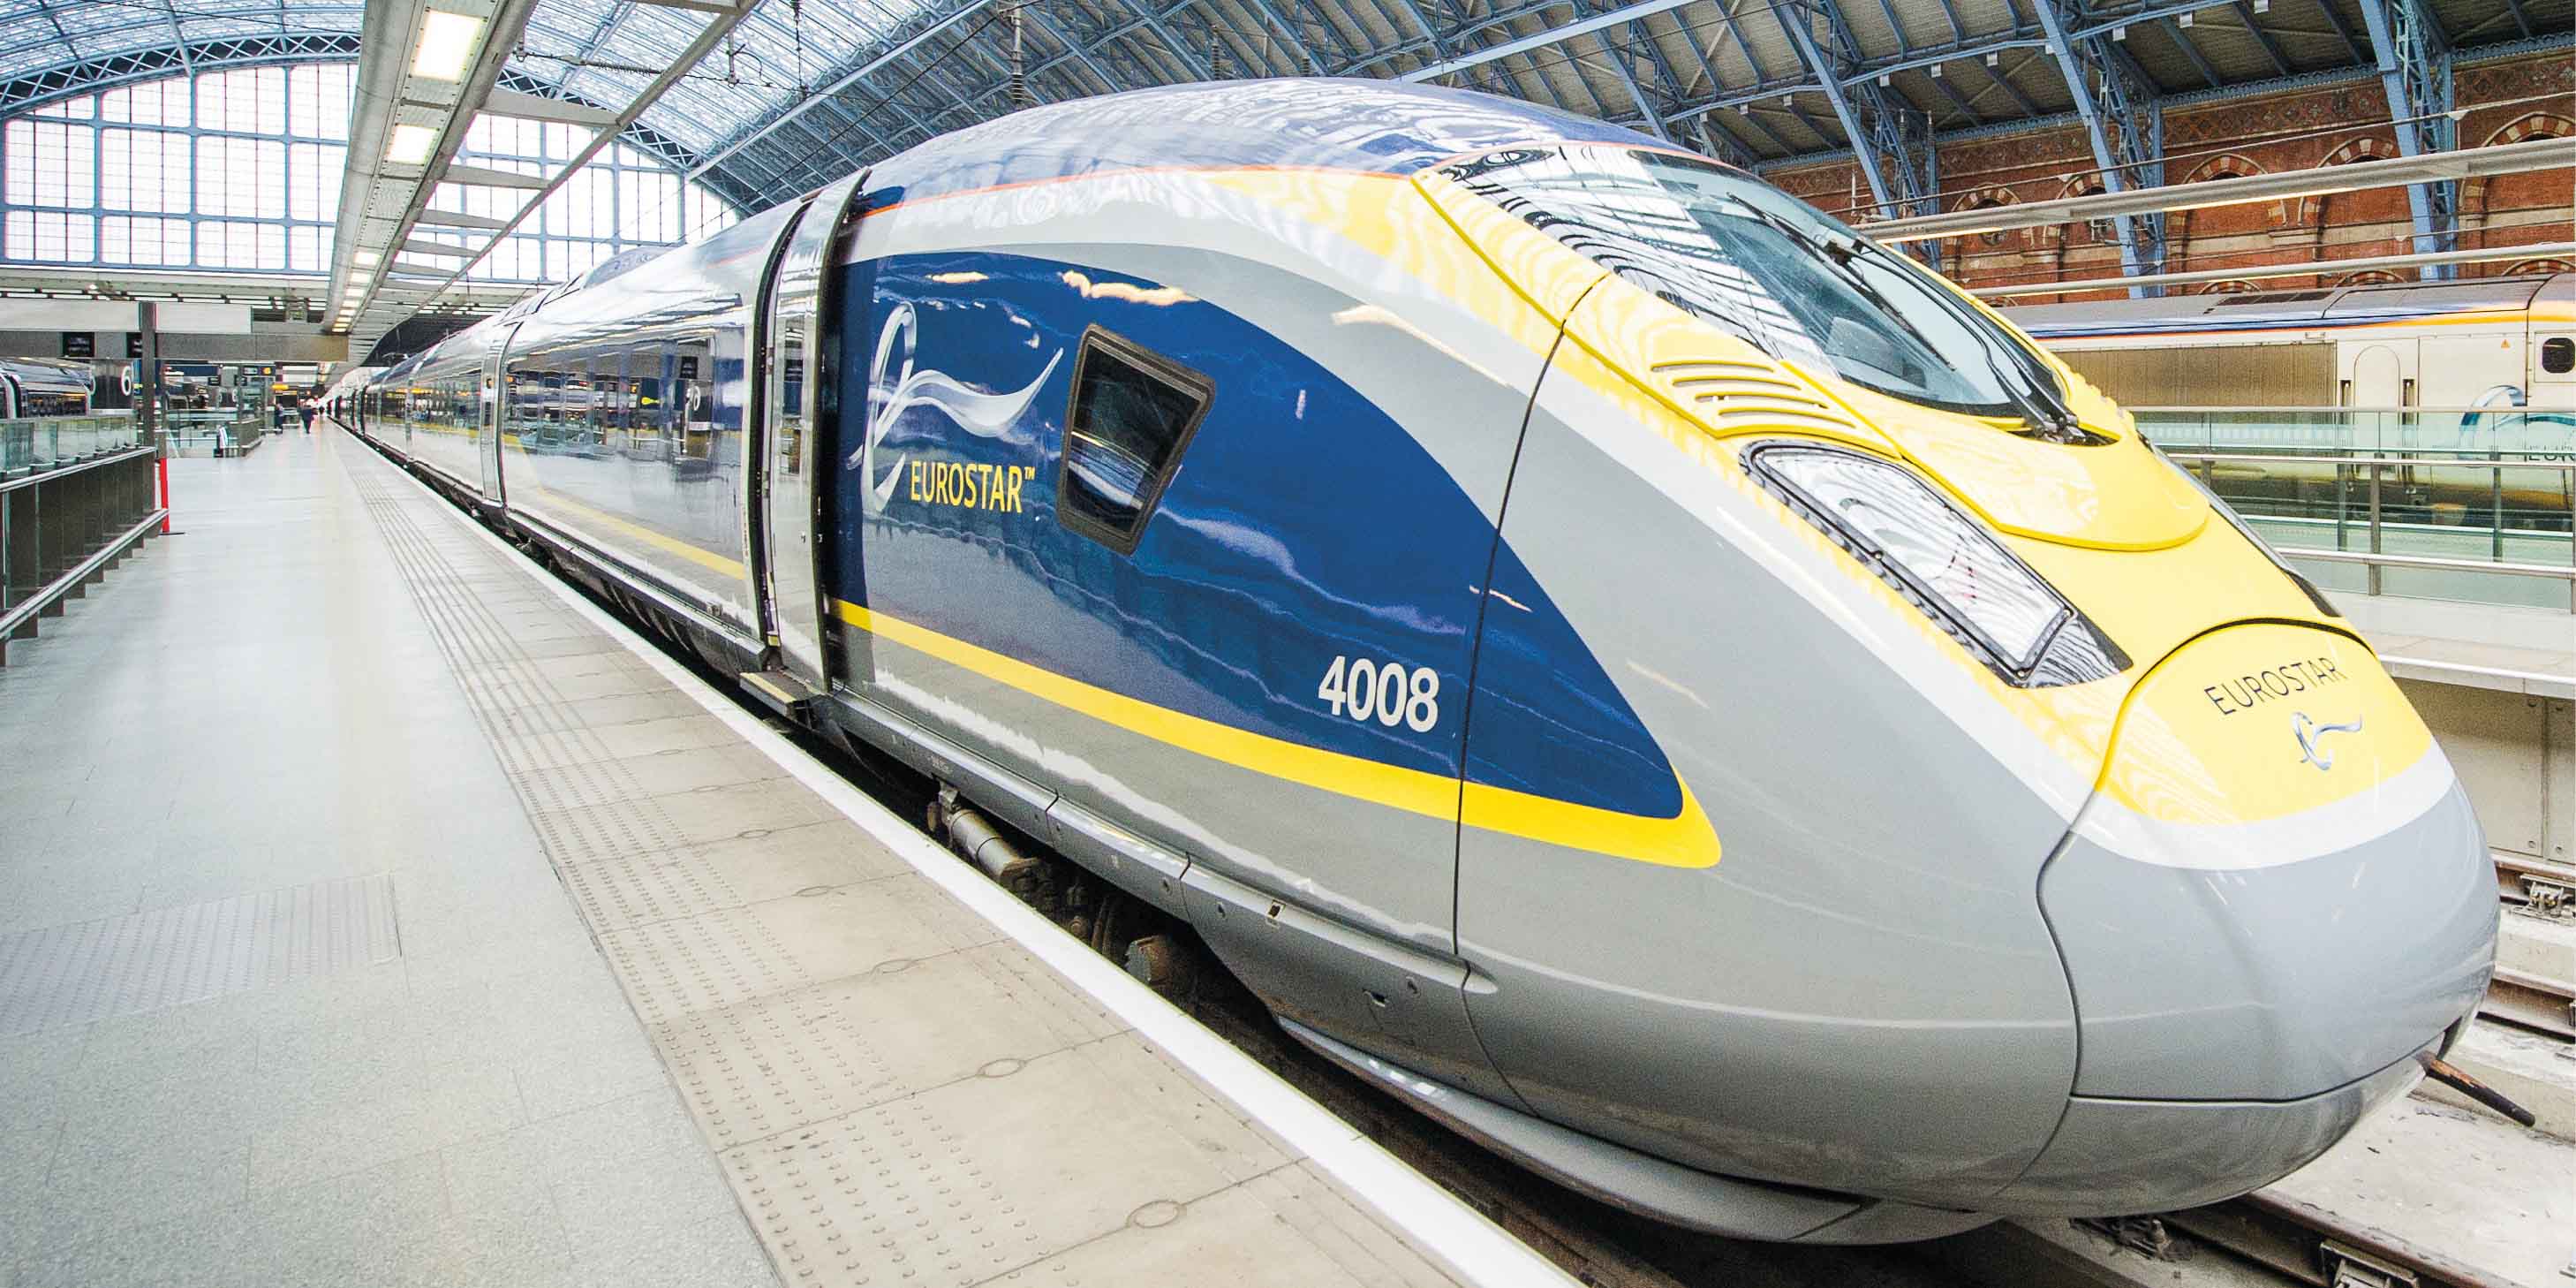 Front end of a Eurostar train in a terminal waiting to depart.